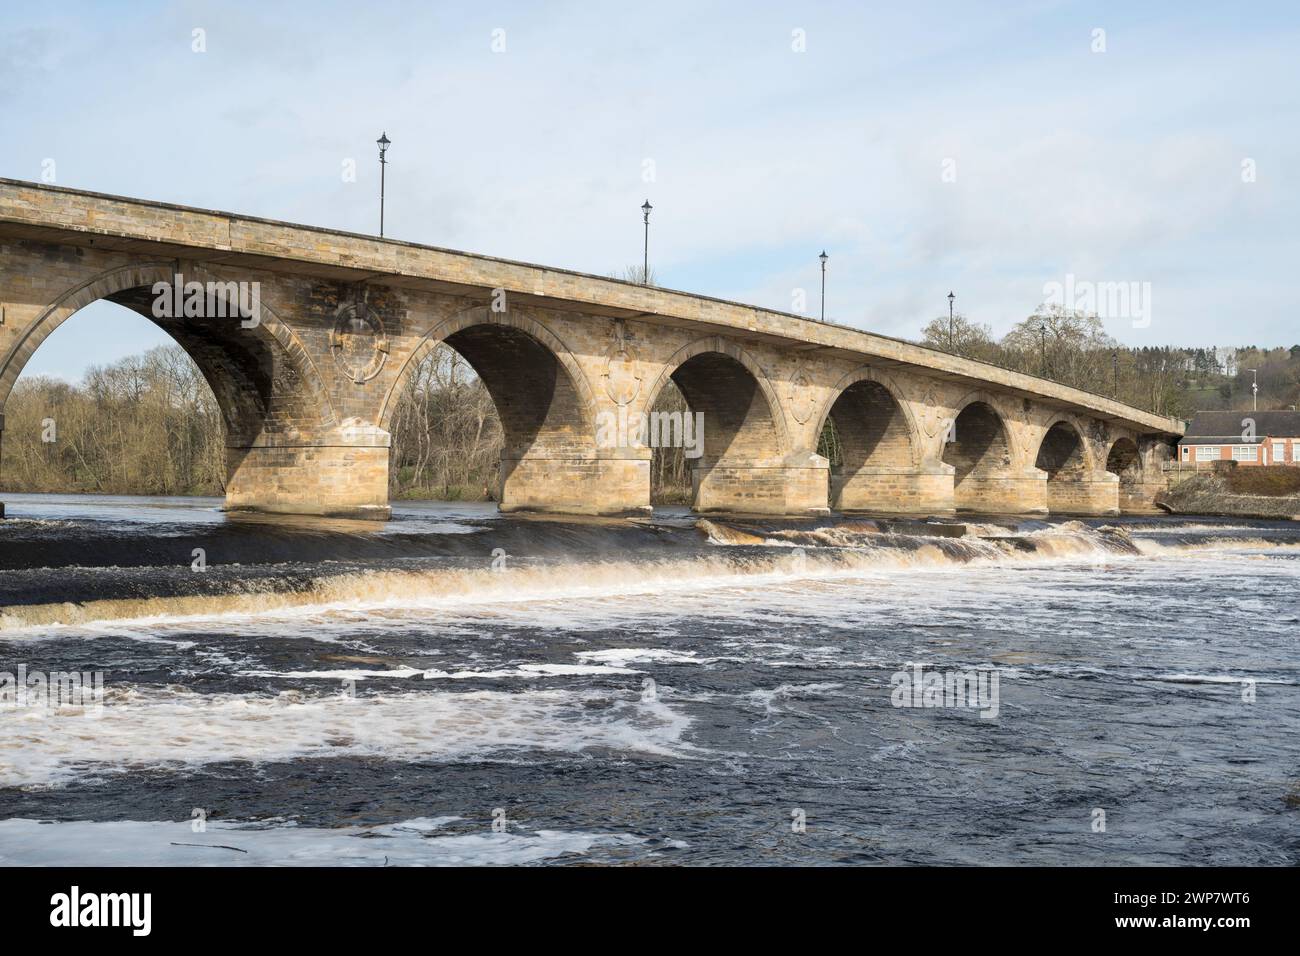 The late 18th century Hexham Bridge over the river Tyne, with the weir in the foreground, Northumberland, England, UK Stock Photo